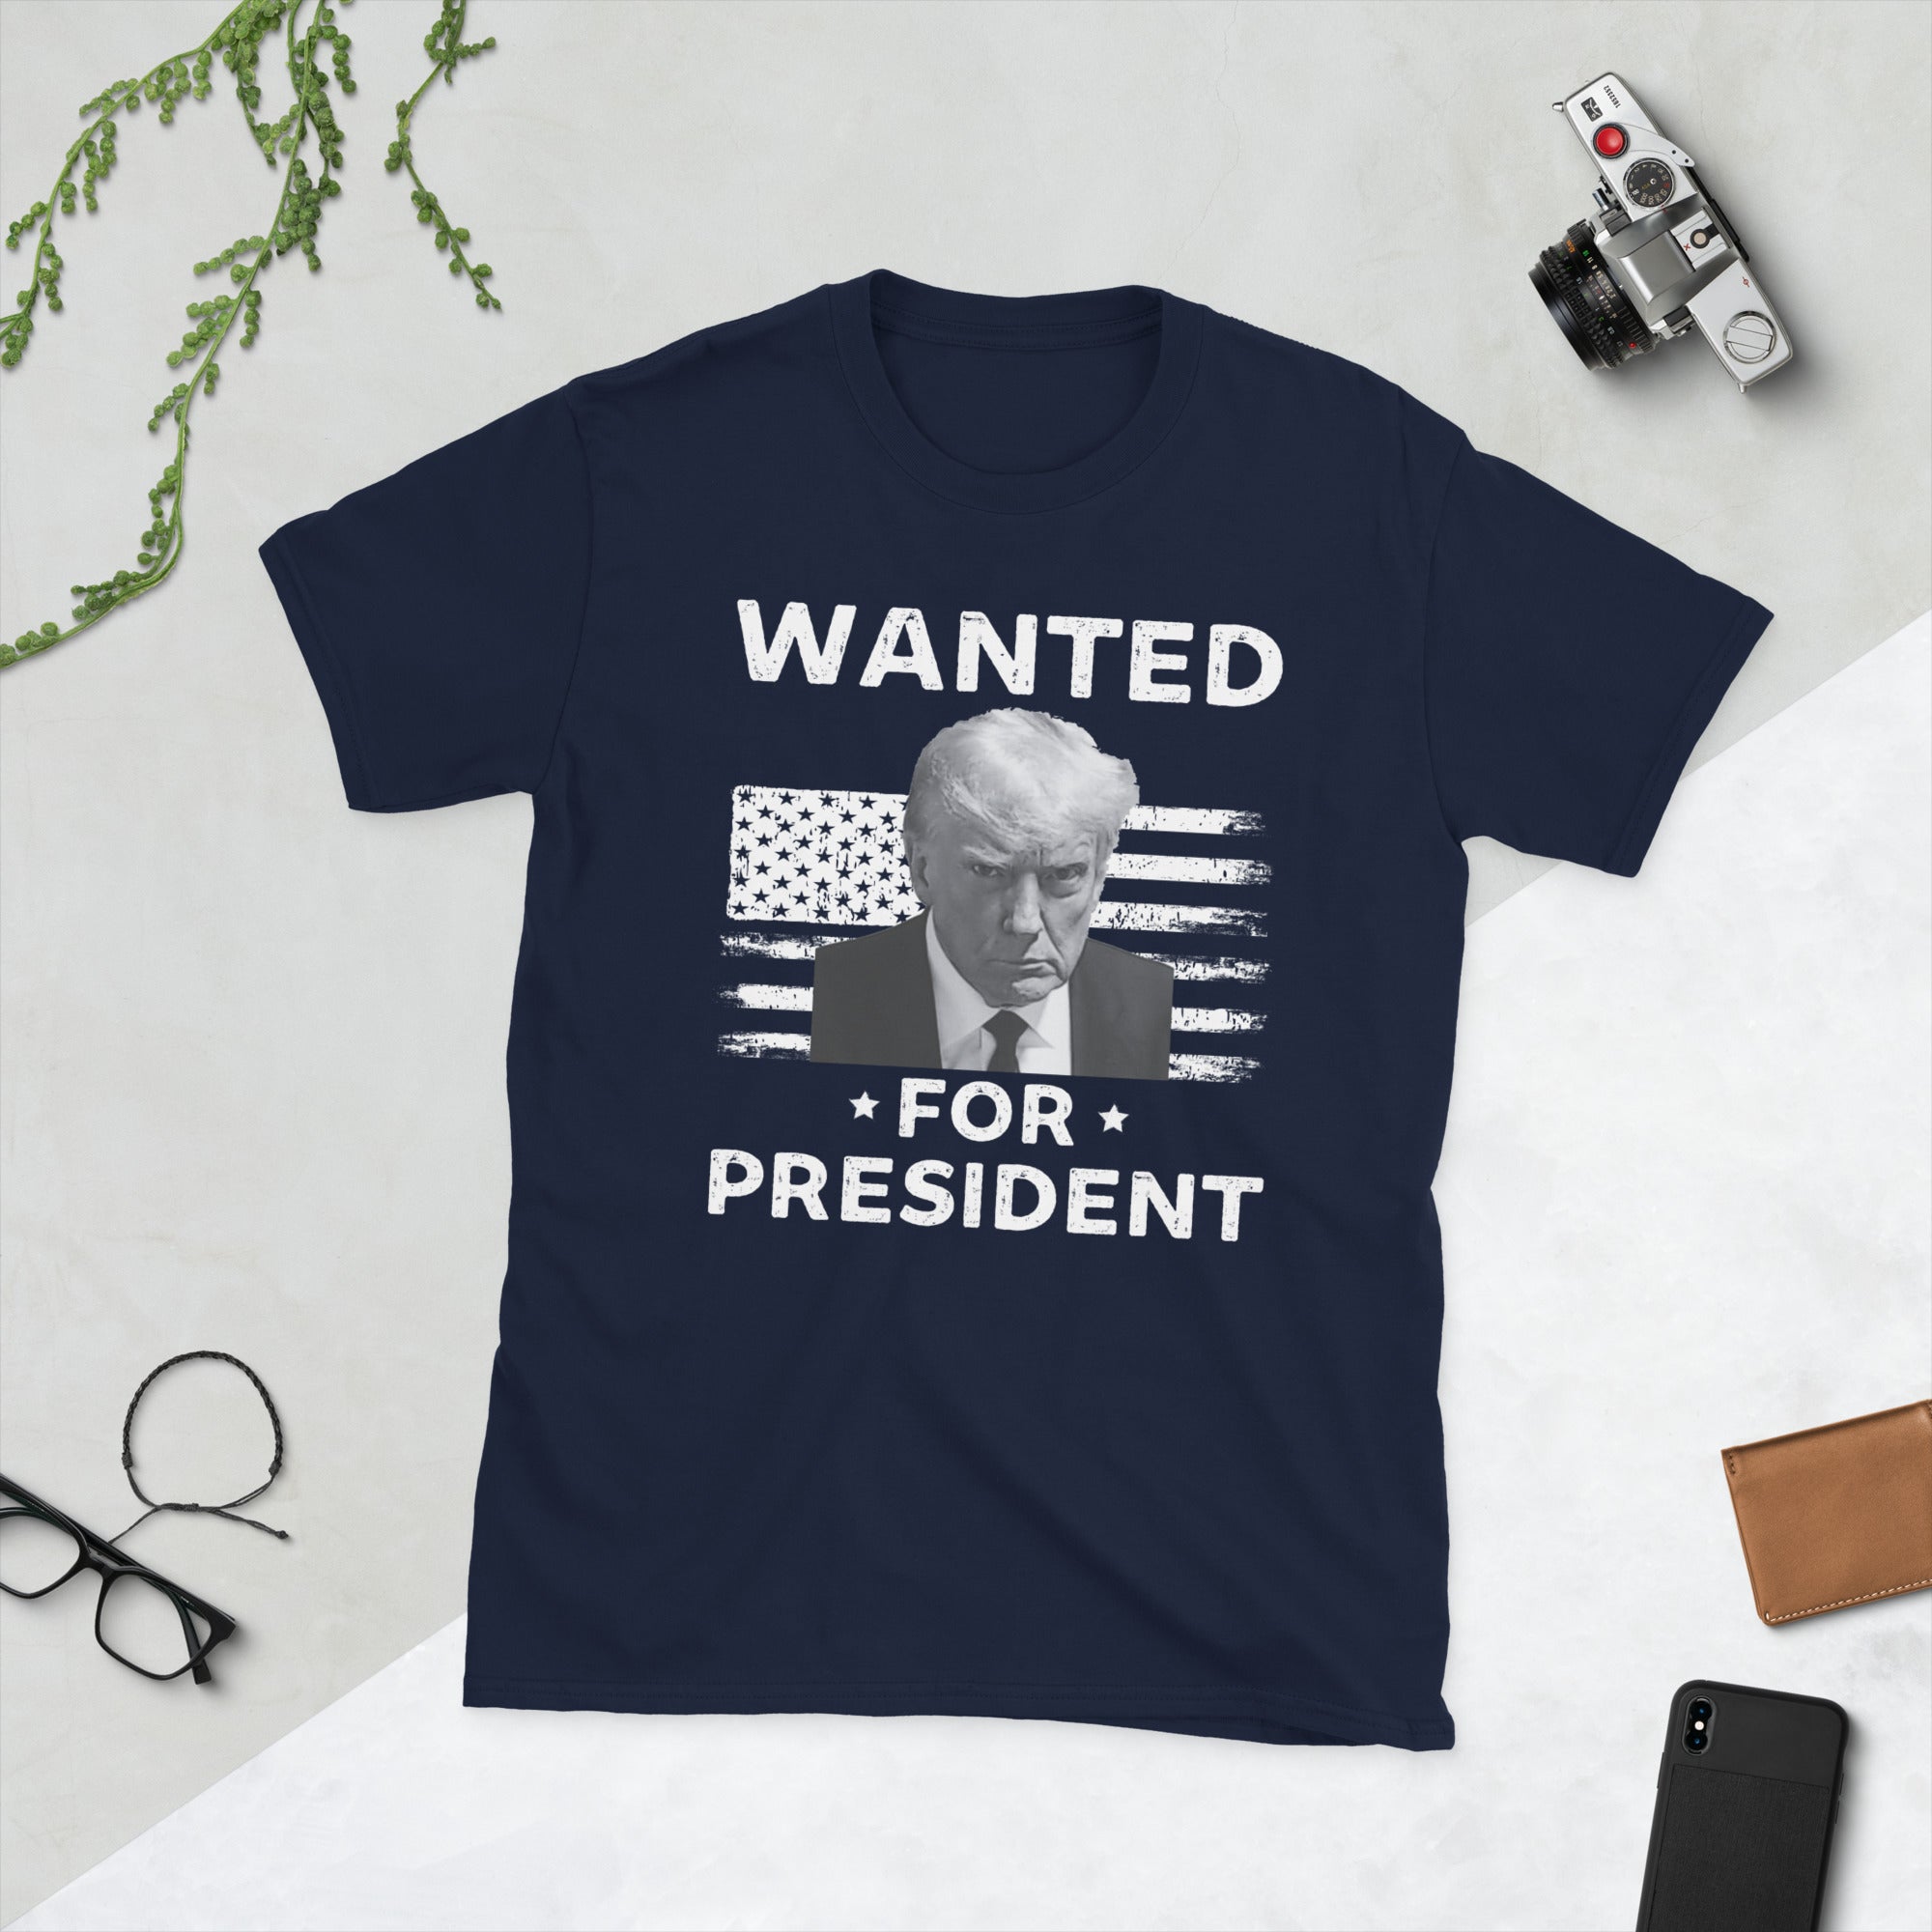 Trump Mugshot T-Shirt, Wanted For President Shirt, Trump Arrested, Donald Trump 2024, Legend Trump, Never Surrender Tee, Republican Gifts - Madeinsea©